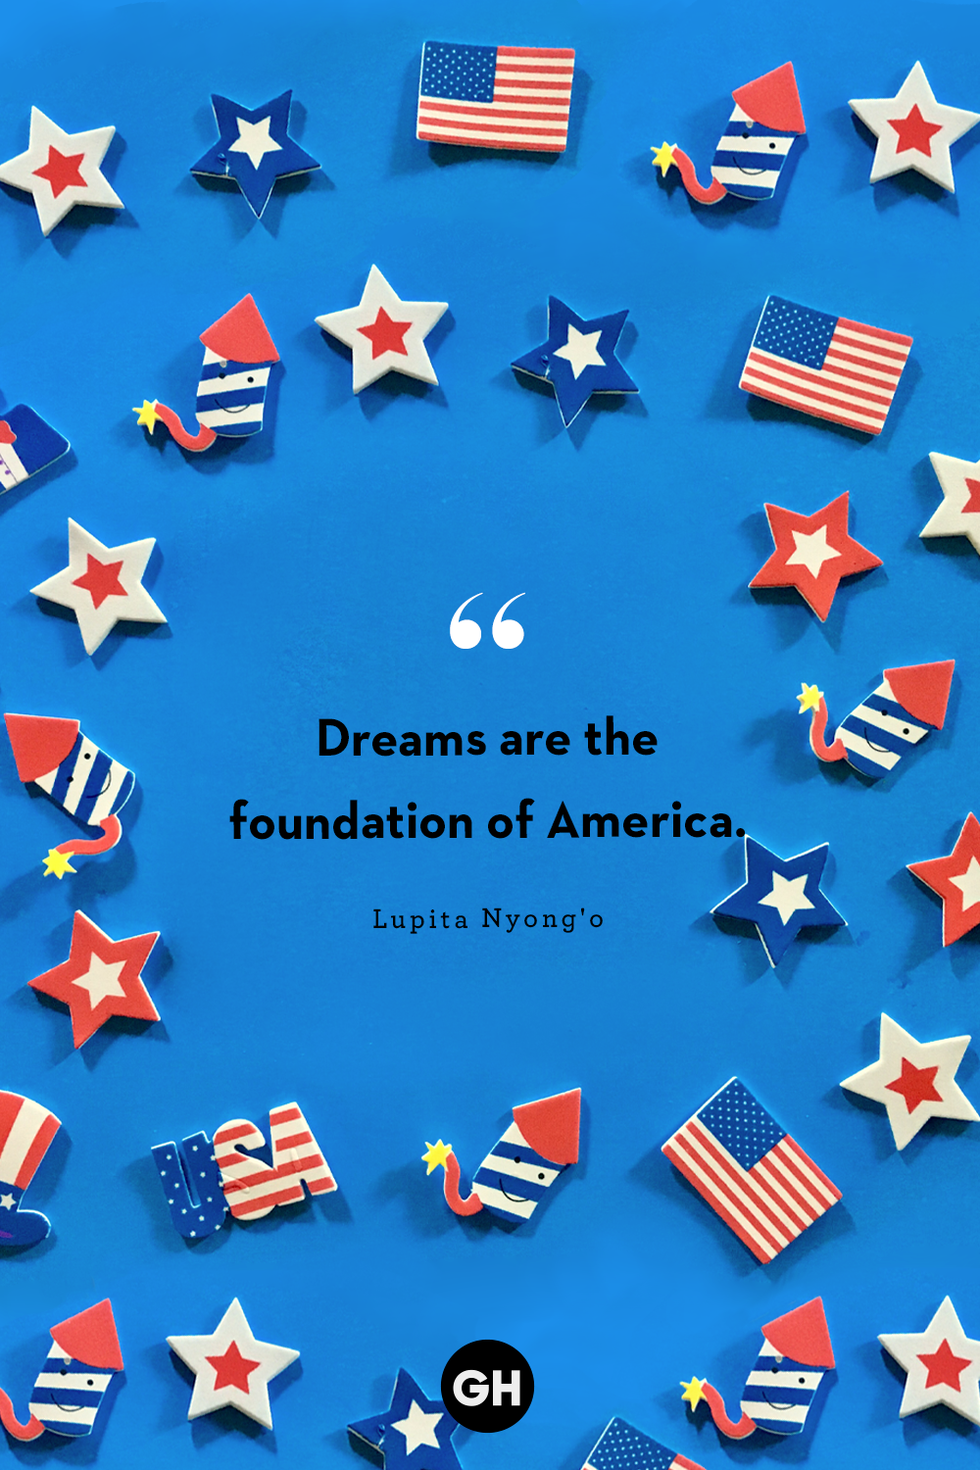 black text on royal blue background with red white and blue stars, flags and fireworks reading dreams are the foundation of america by lupita nyong'o